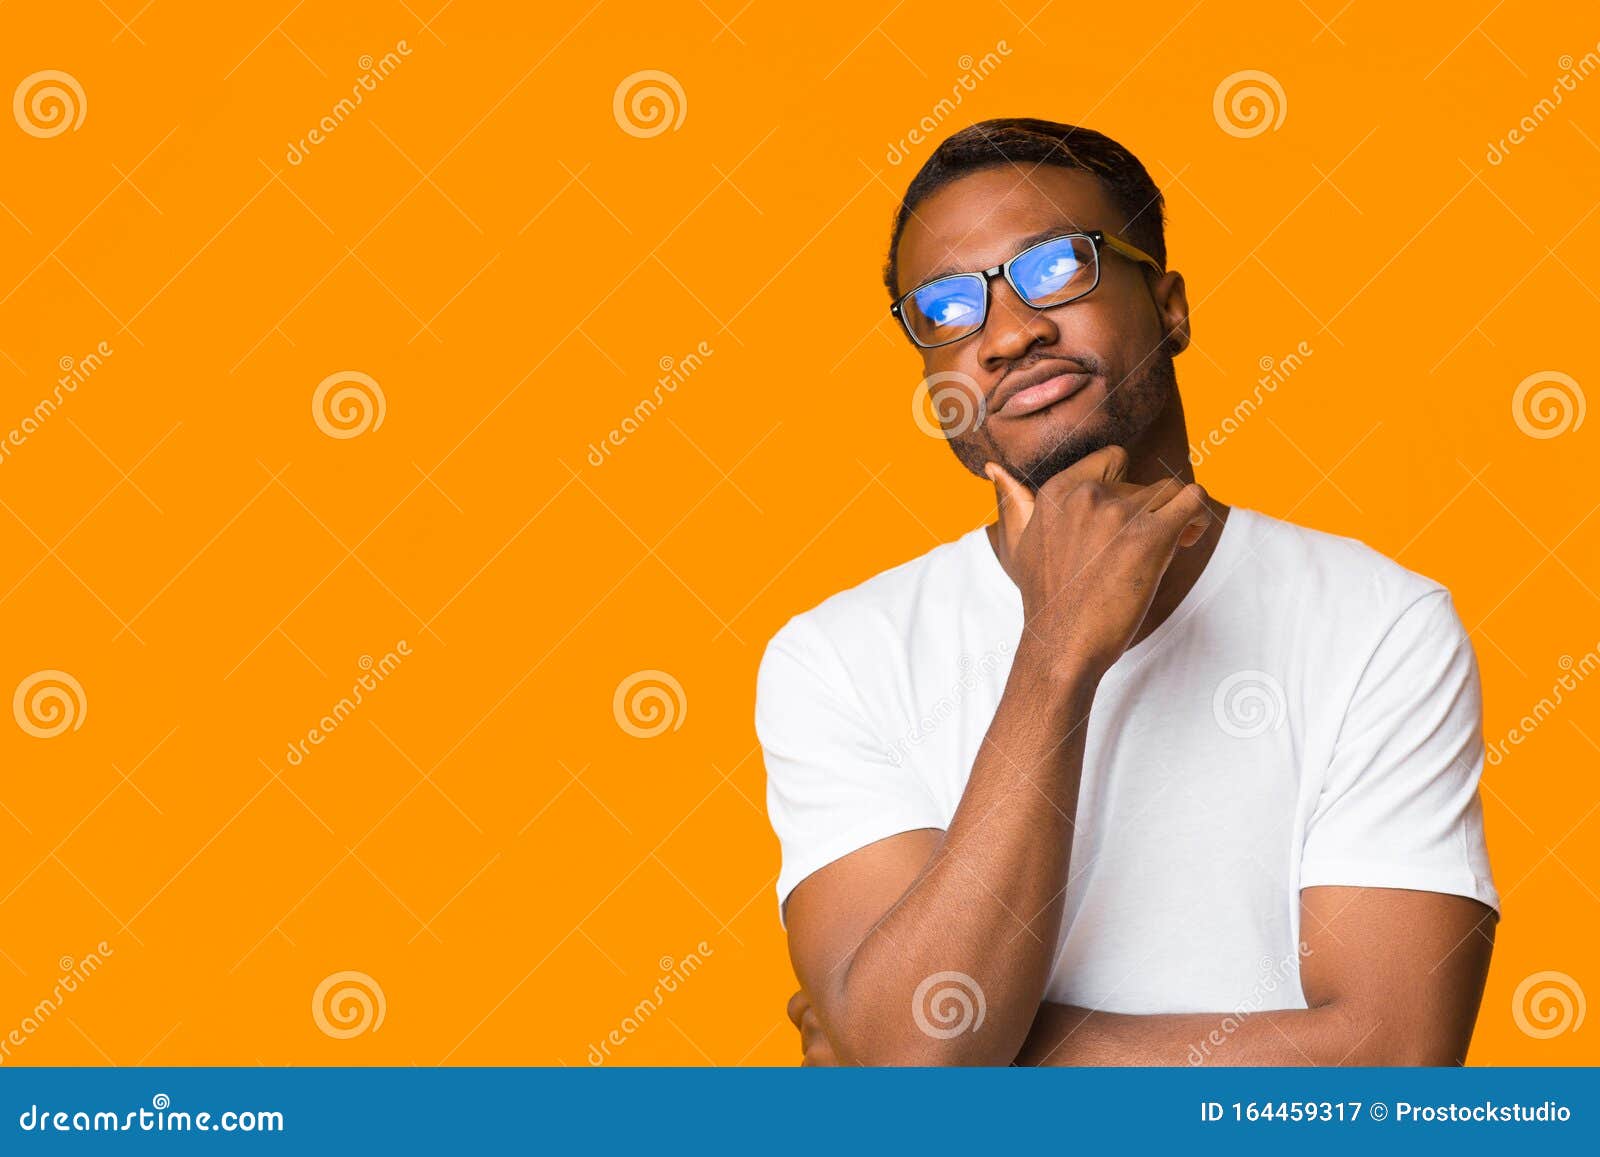 african american guy thinking touching chin standing over orange background